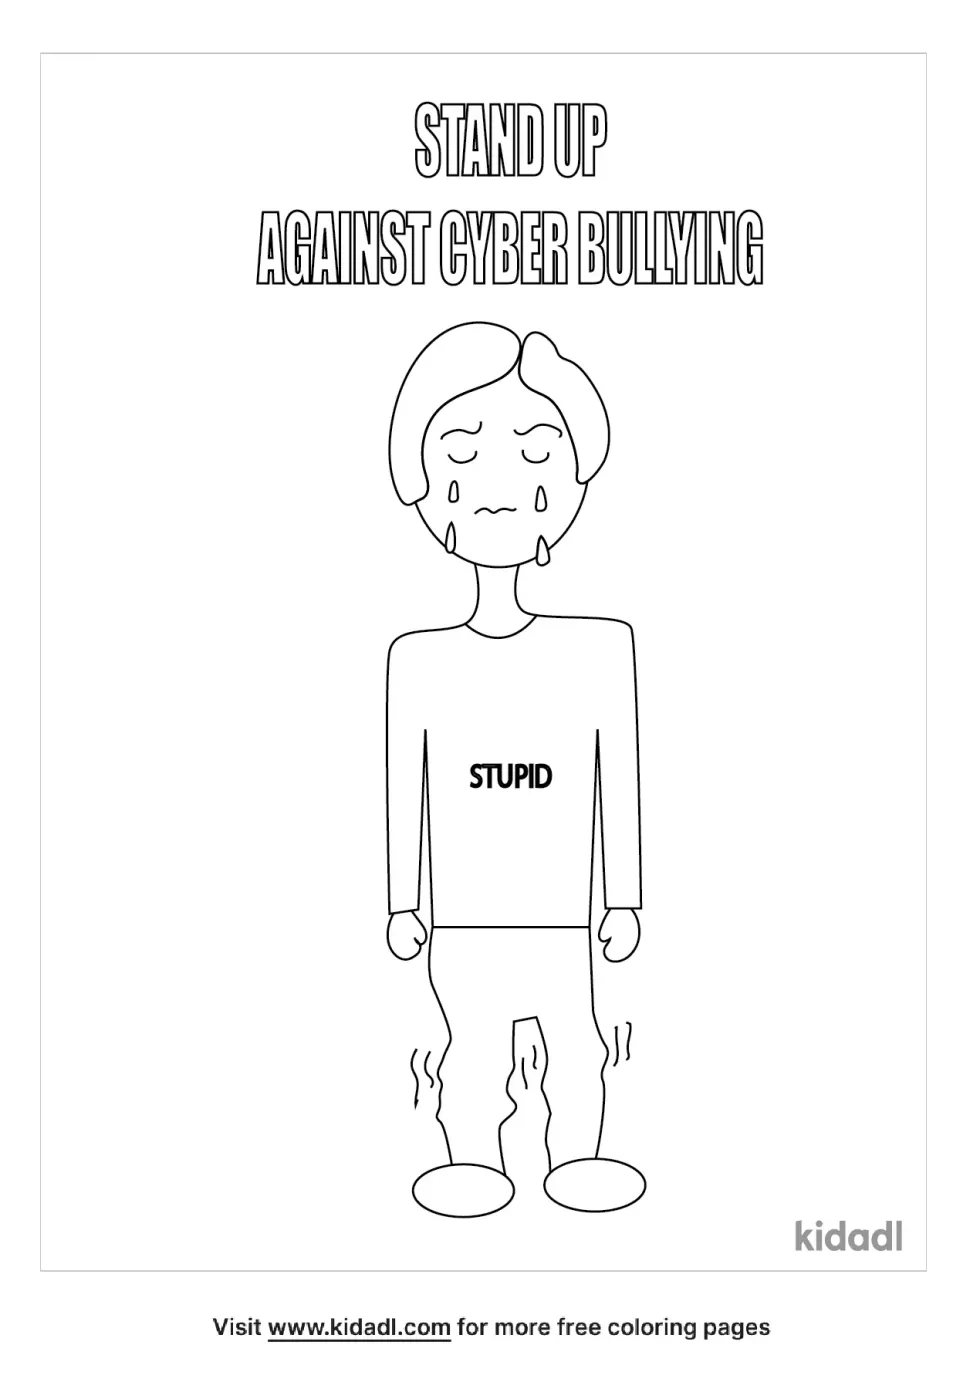 Cyberbullying Coloring Page